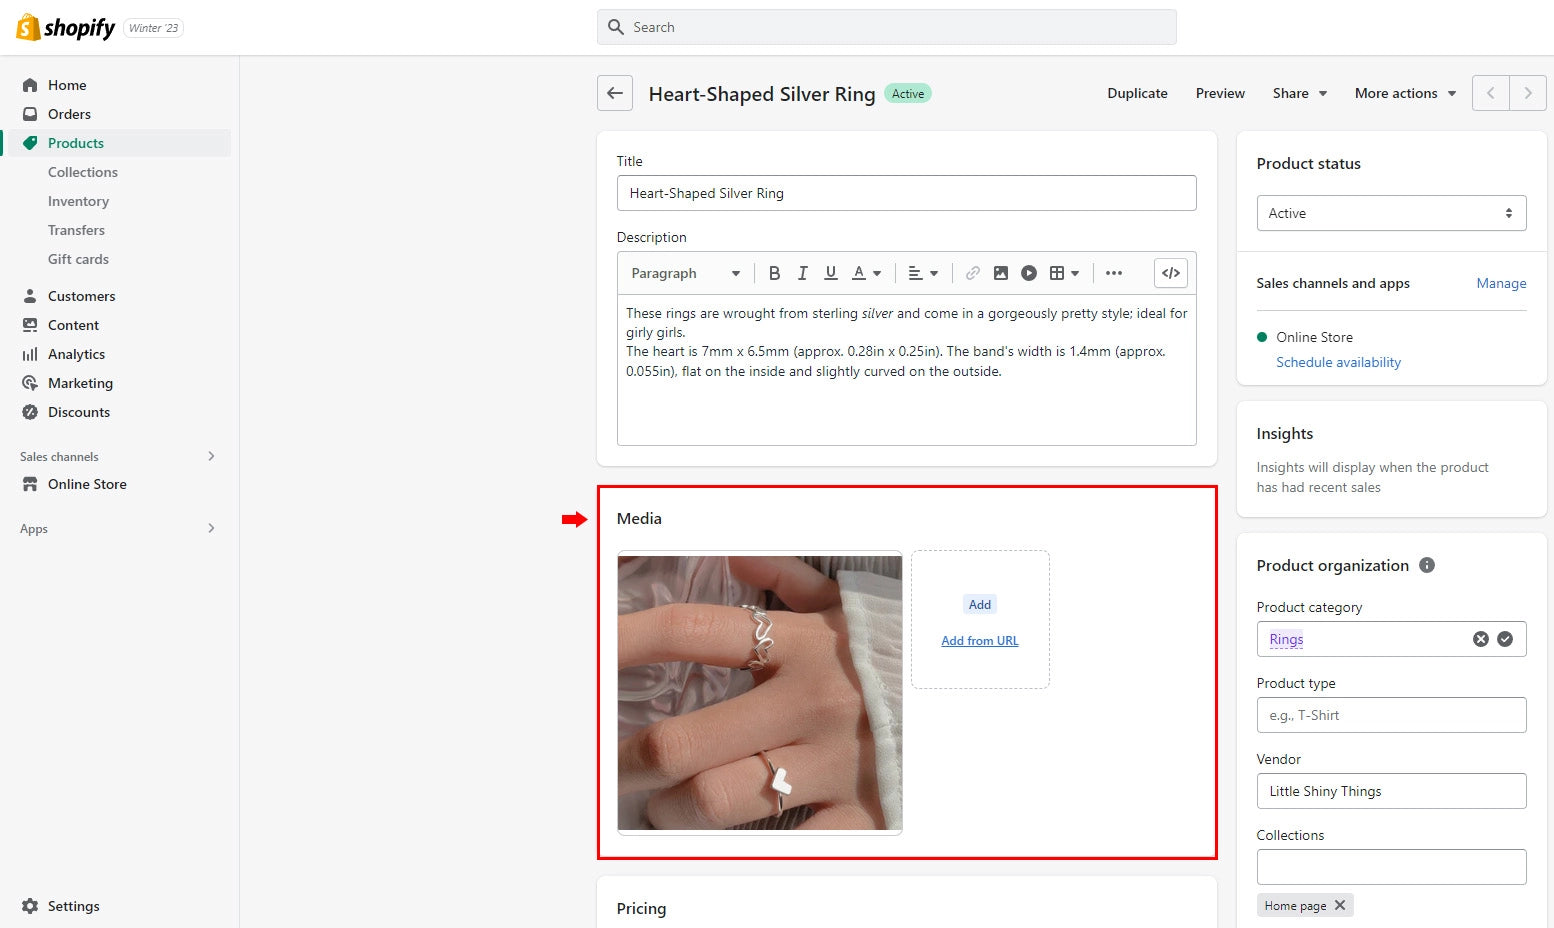 Screenshot of Shopify Product Details Page